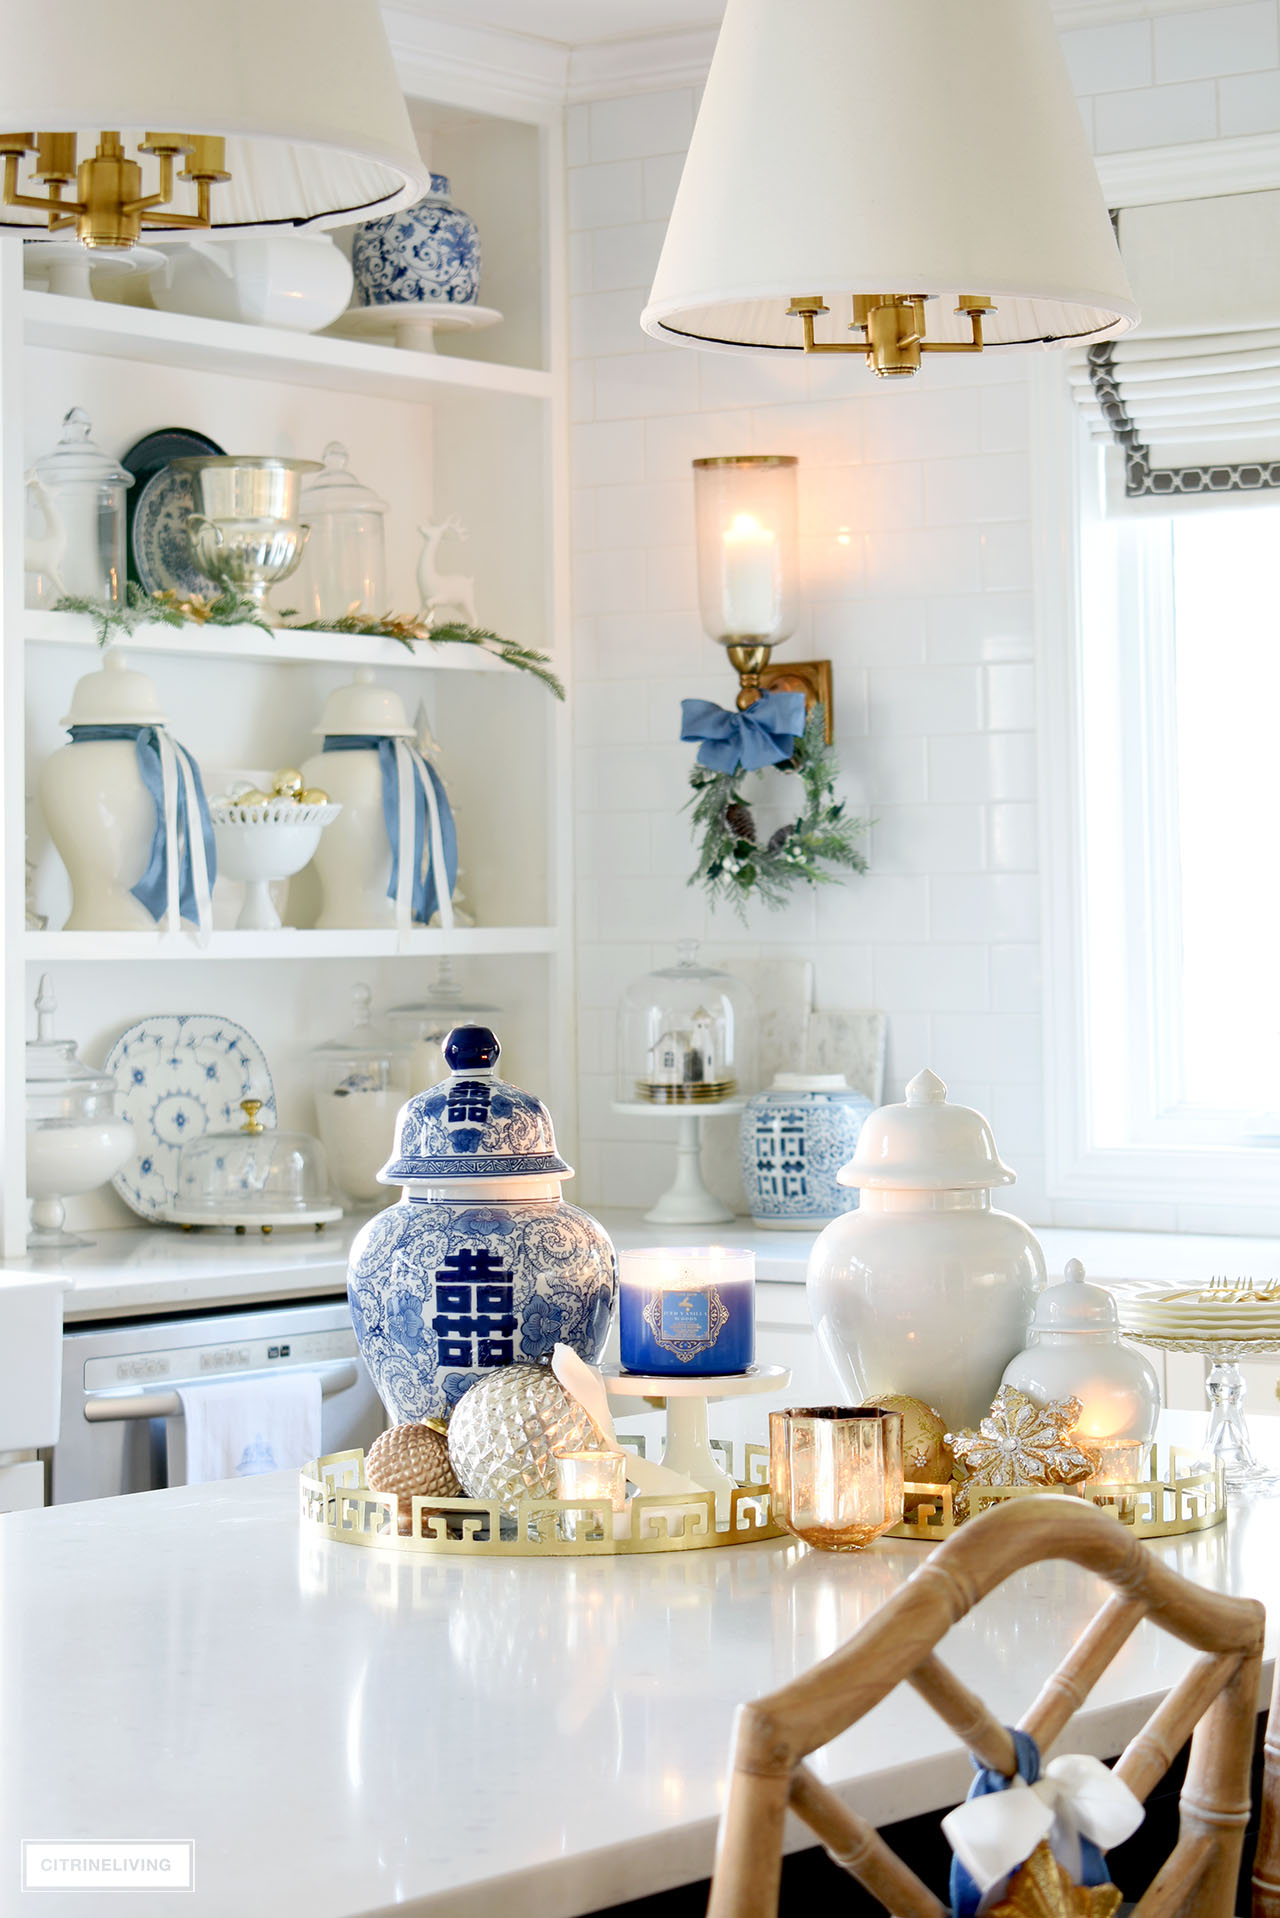 Kitchen island styled for Christmas with blue and white ginger jars, ornaments, candles and dishes.